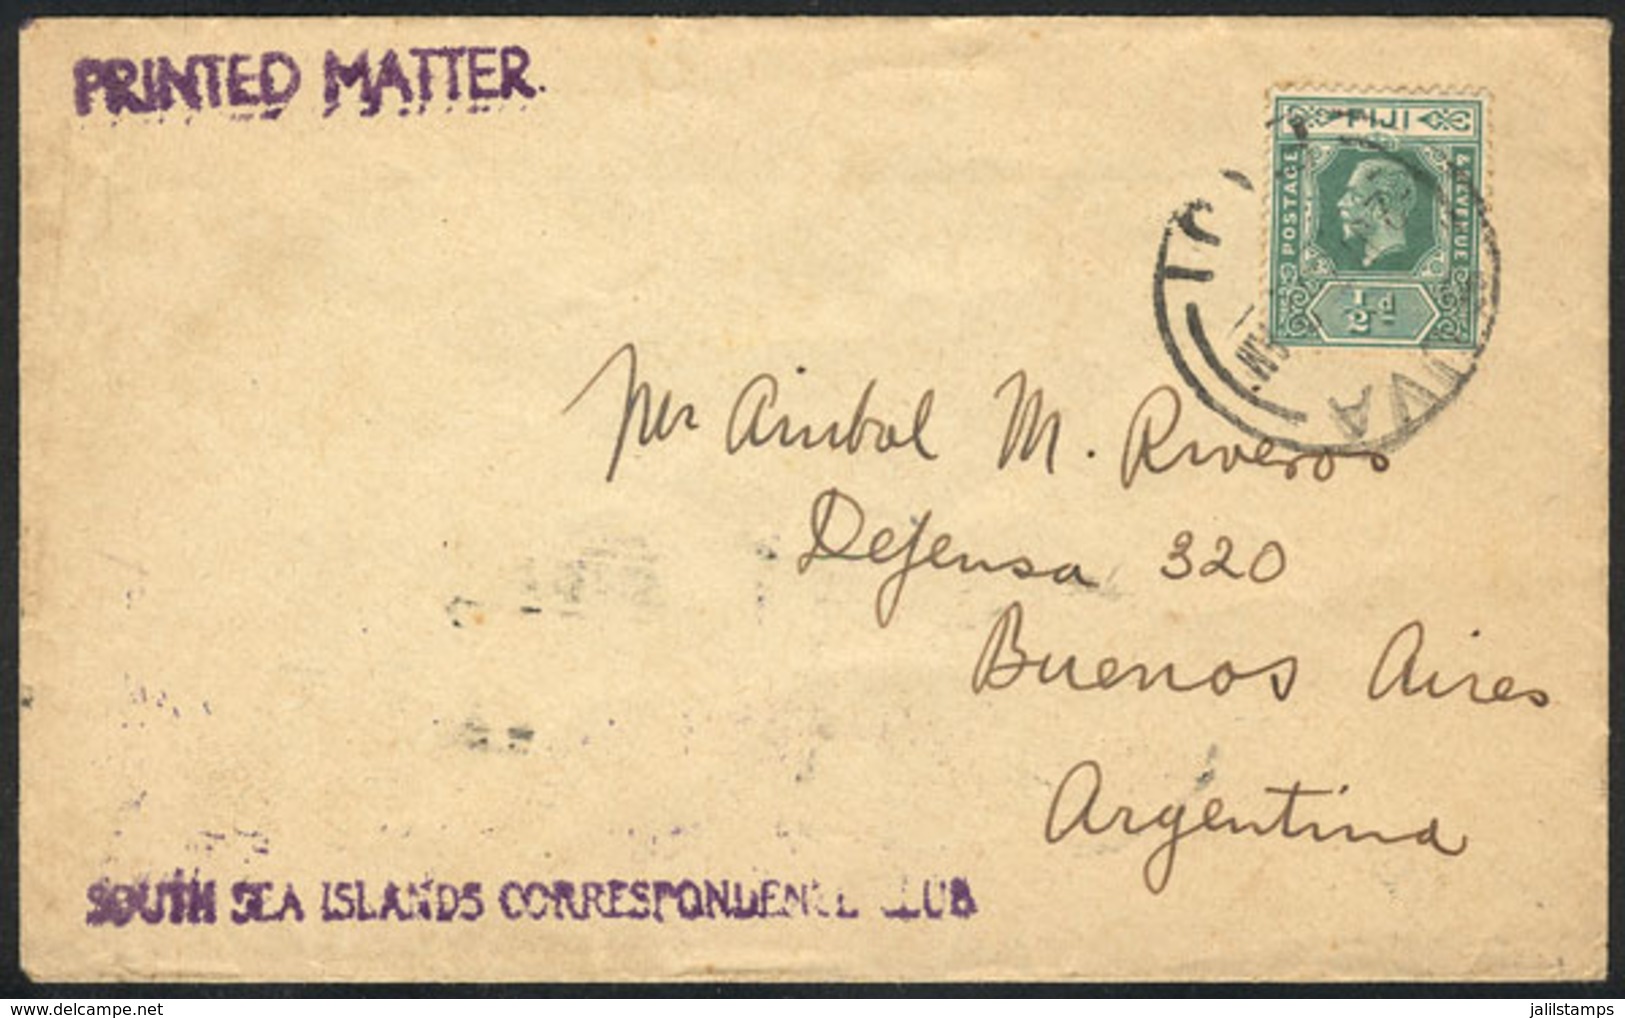 FIJI: 2/JUL/1929 SUVA - Argentina: Cover With Printed Matter, Franked With ½p., With Buenos Aires Arrival Backstamp Of 1 - Fiji (1970-...)